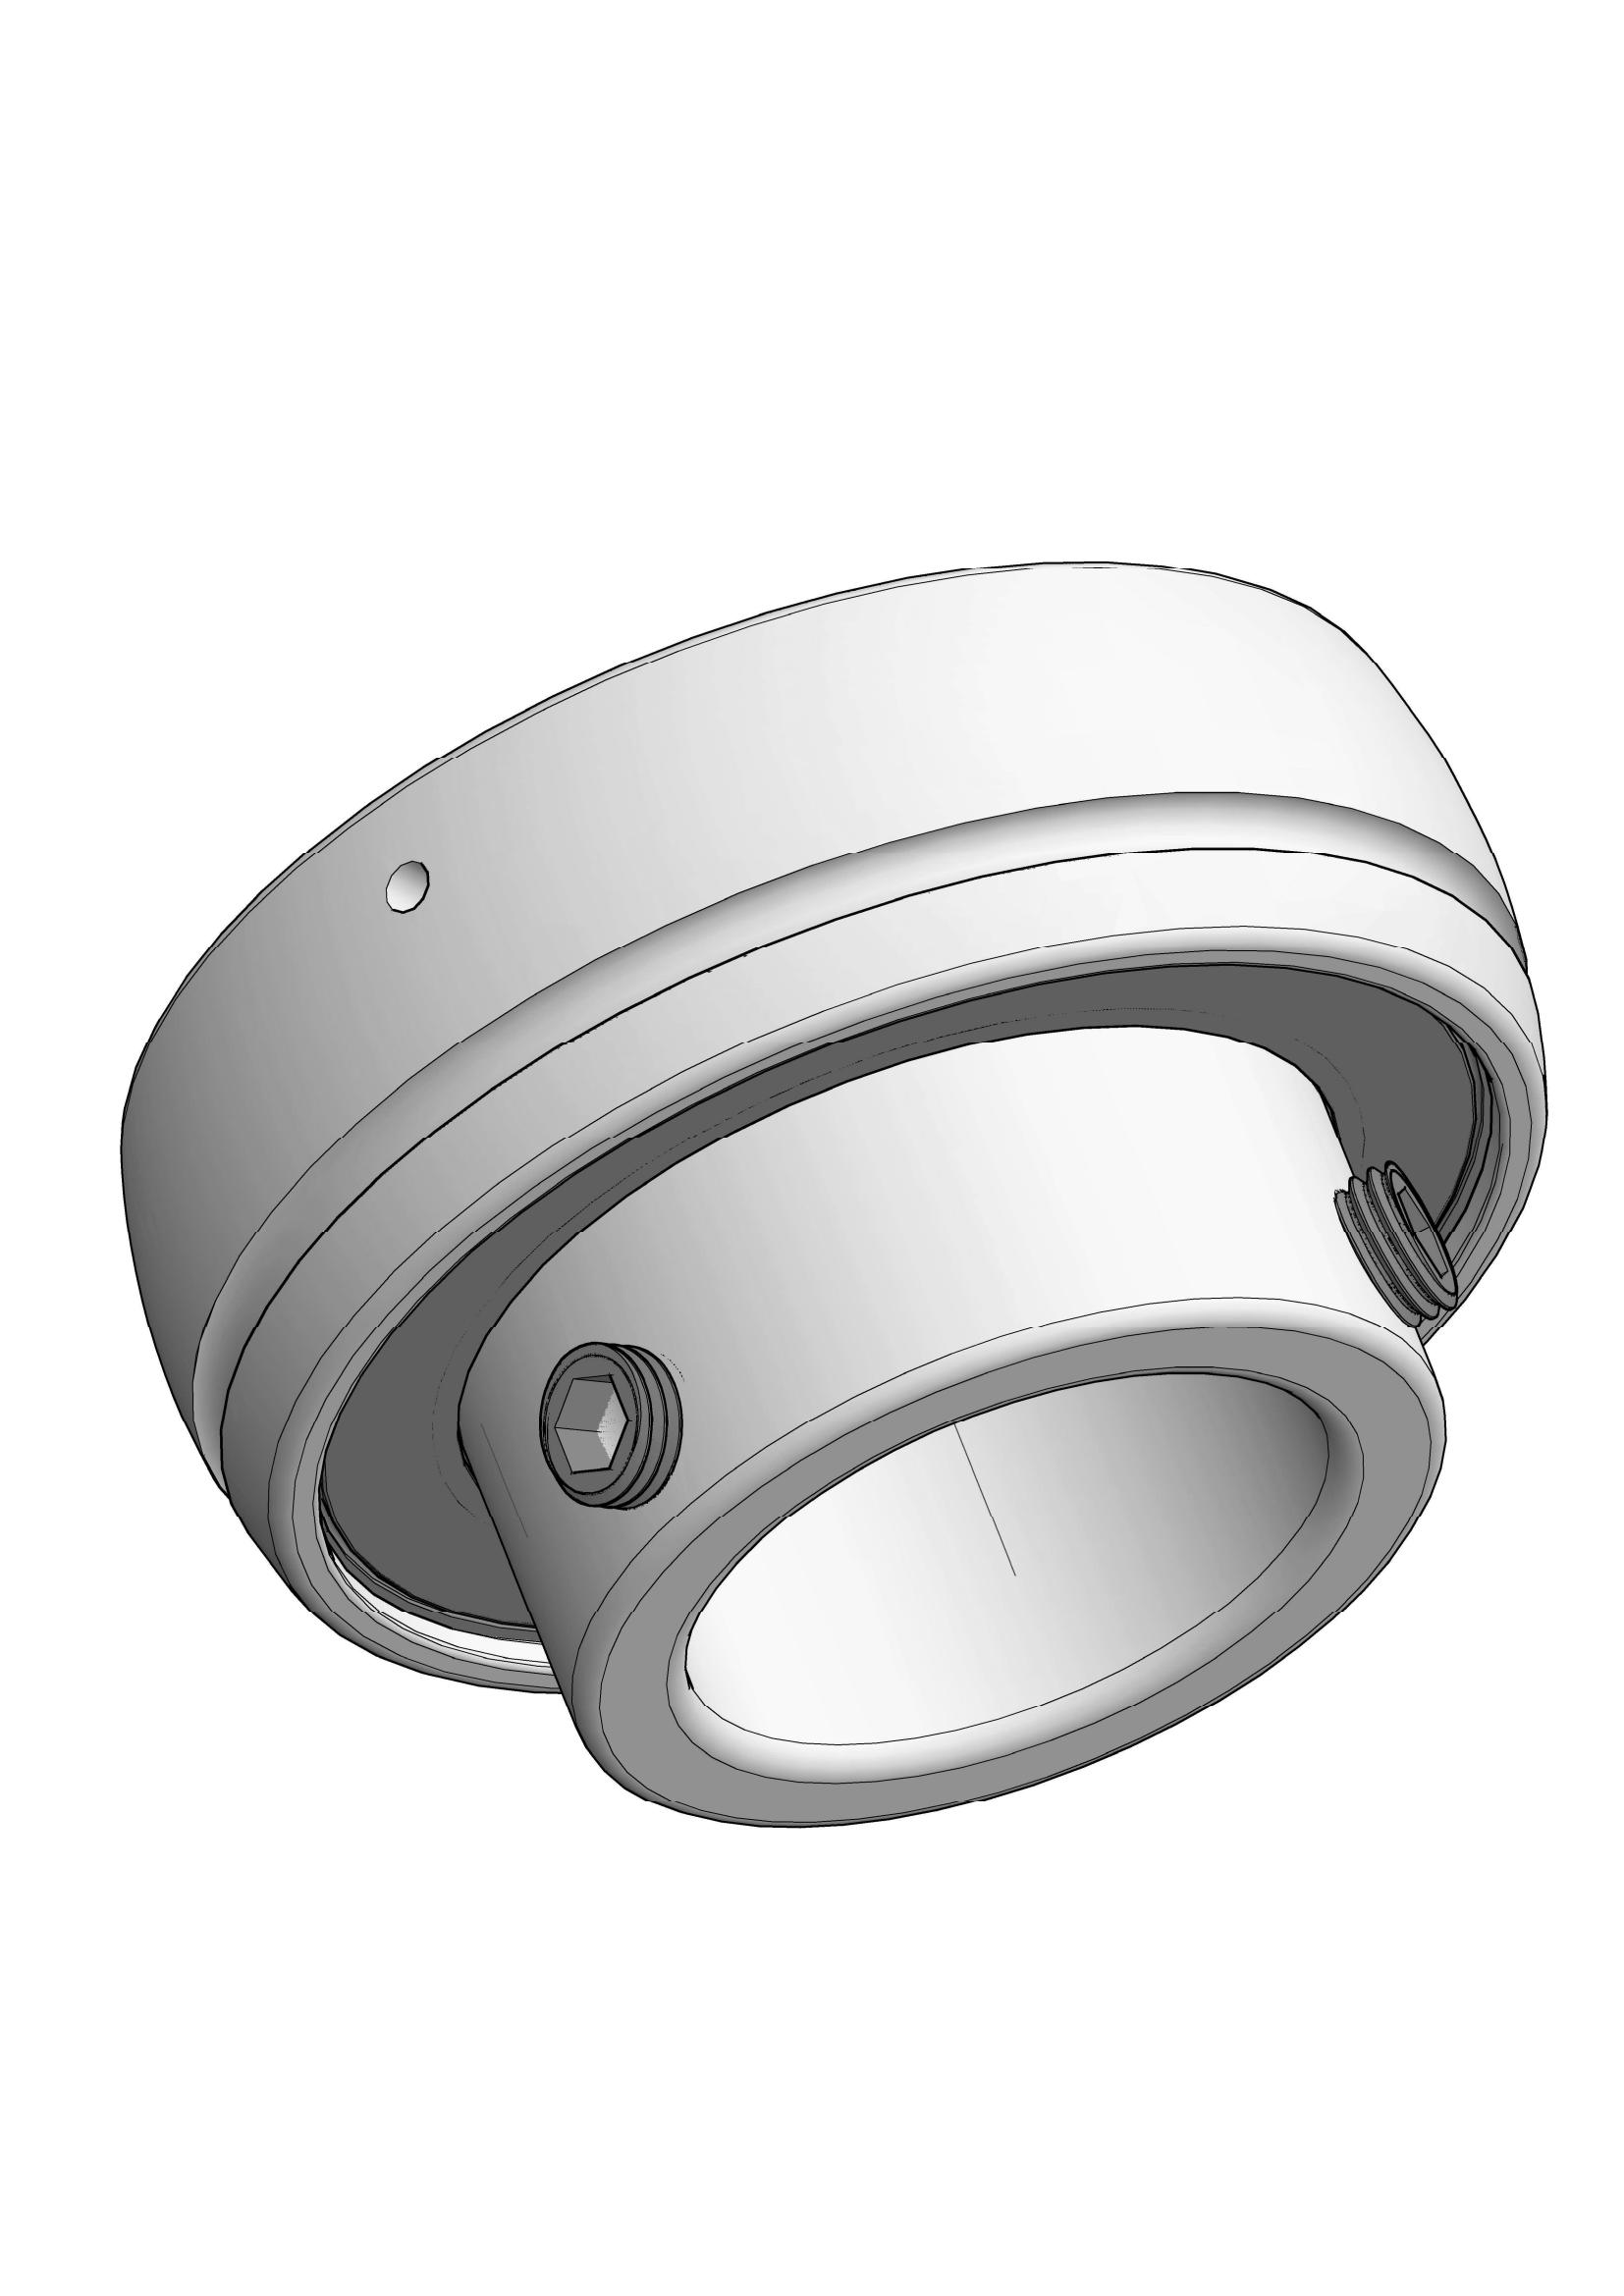 SB205-15 insert ball bearings with Eccentric Collar Lock with 15/16 inch Bore